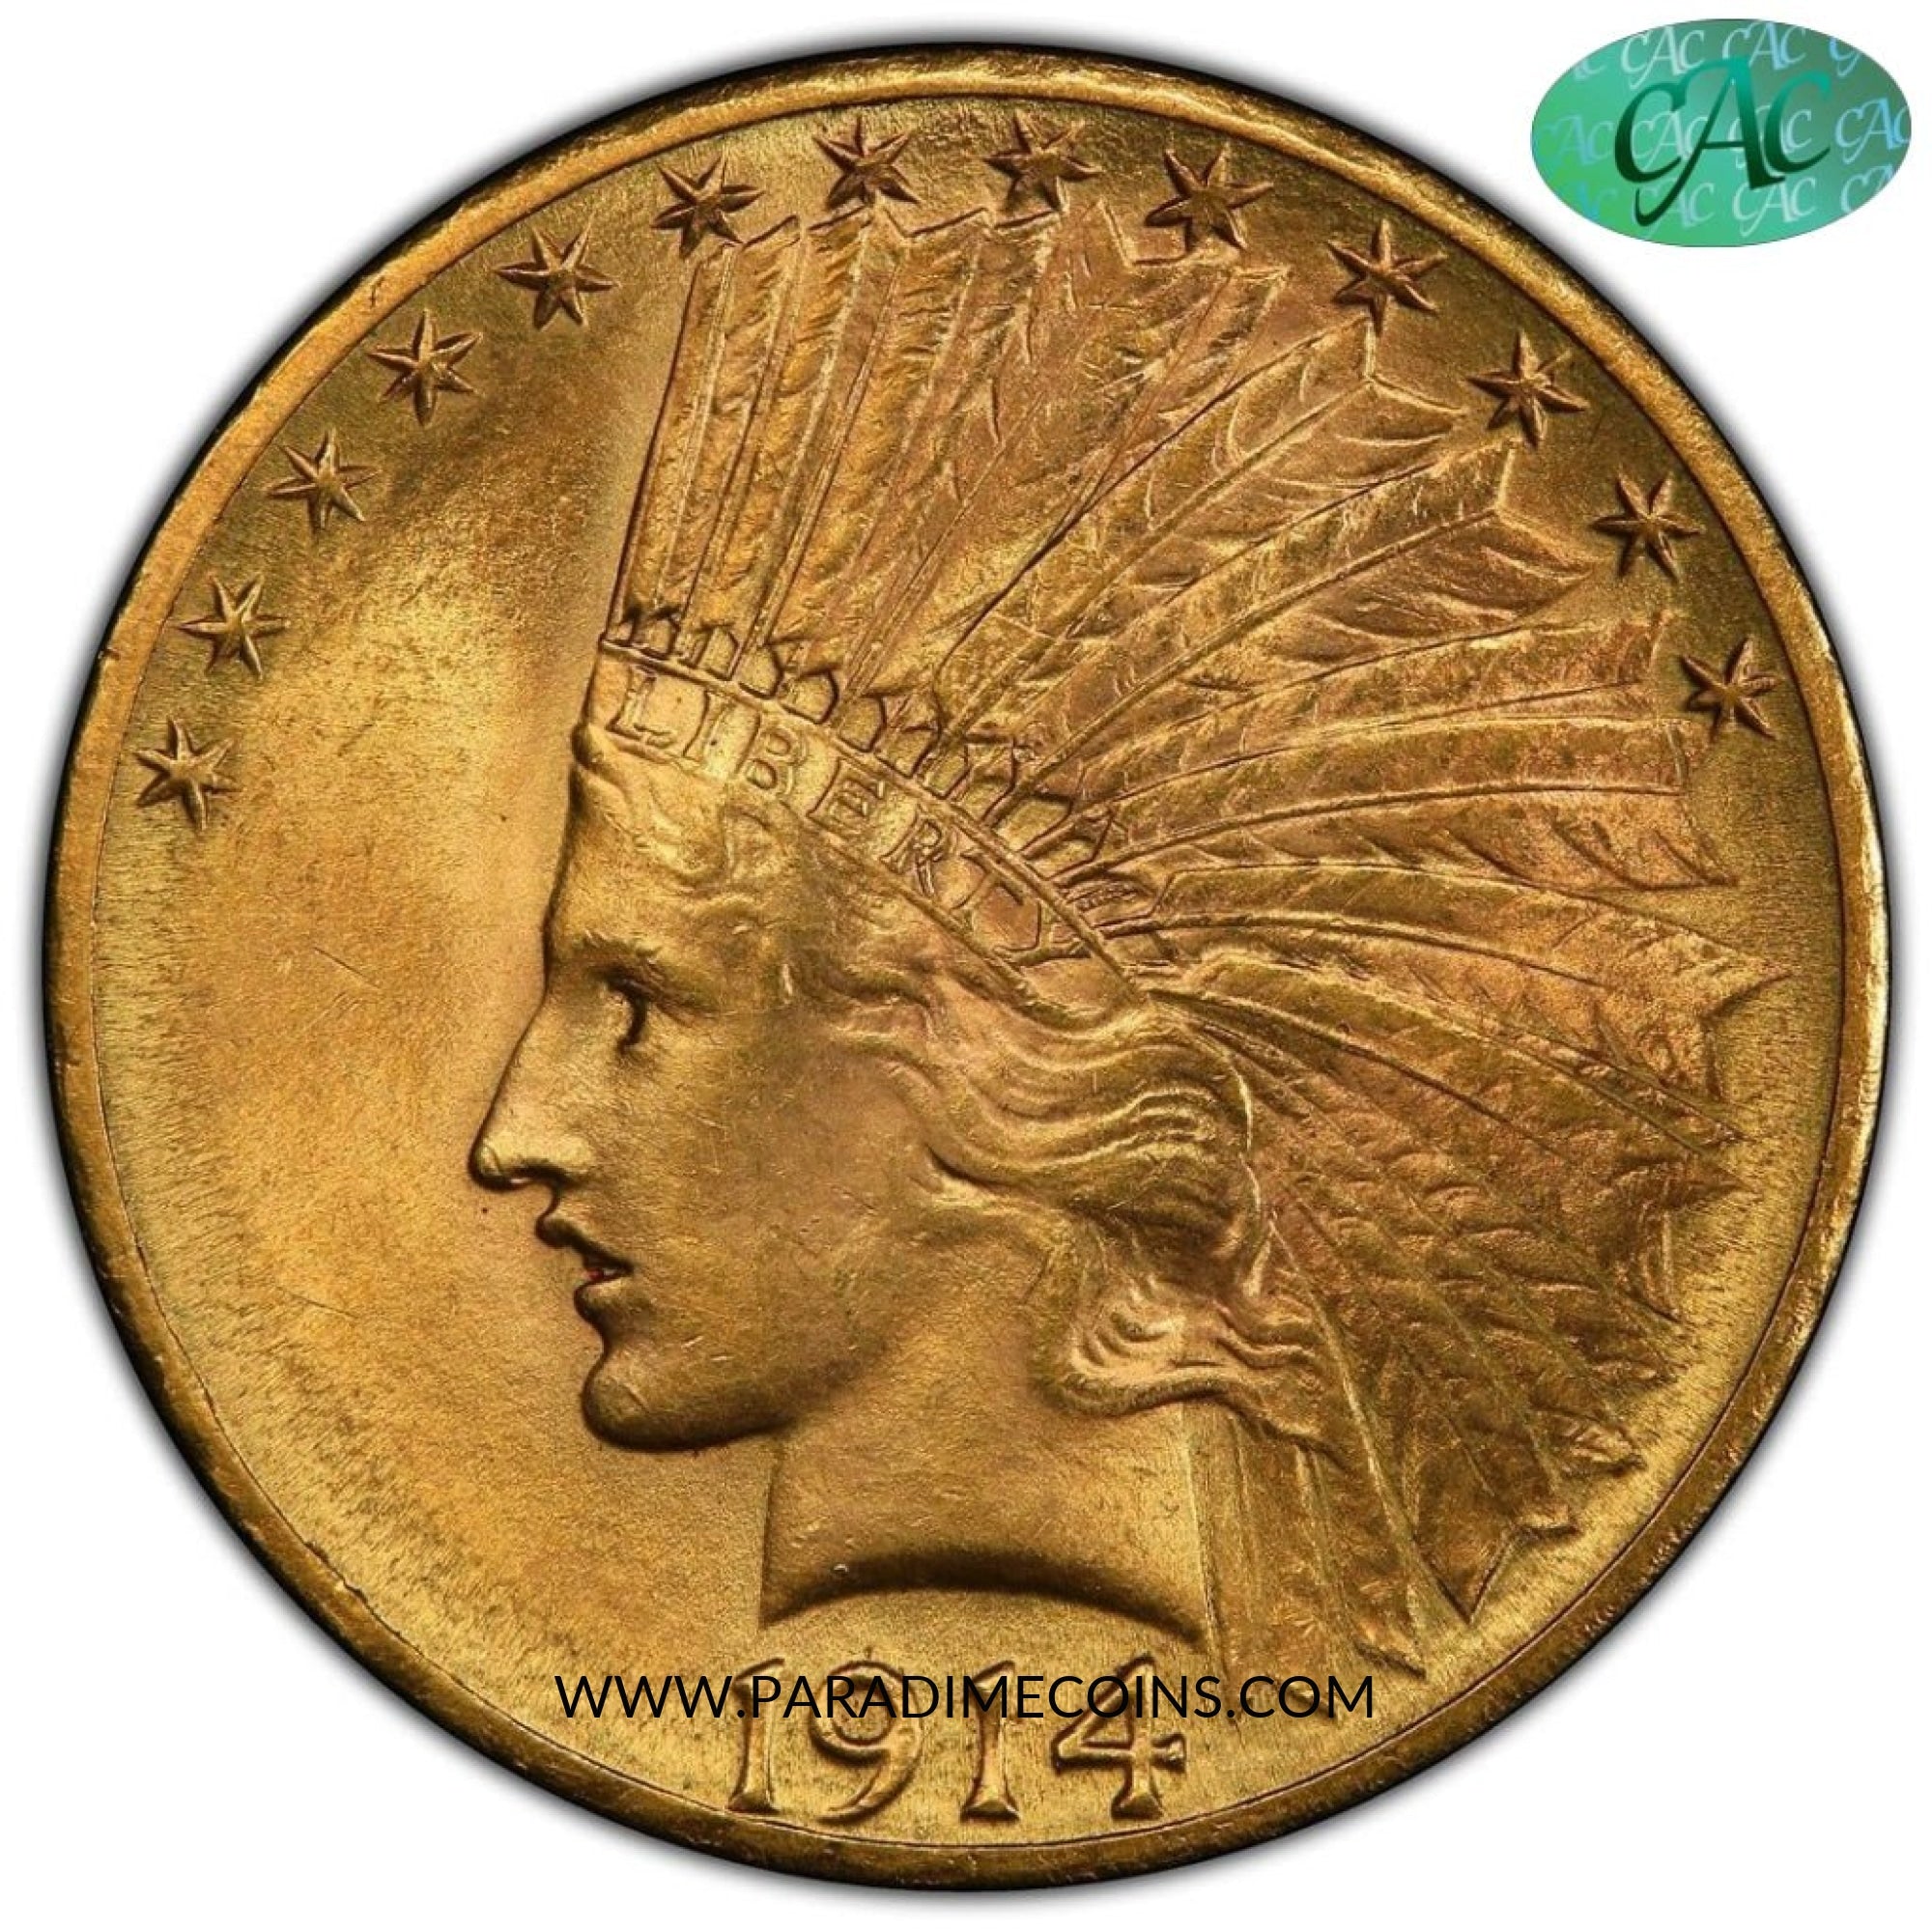 1914-D $10 MS64 PCGS CAC - Paradime Coins | PCGS NGC CACG CAC Rare US Numismatic Coins For Sale